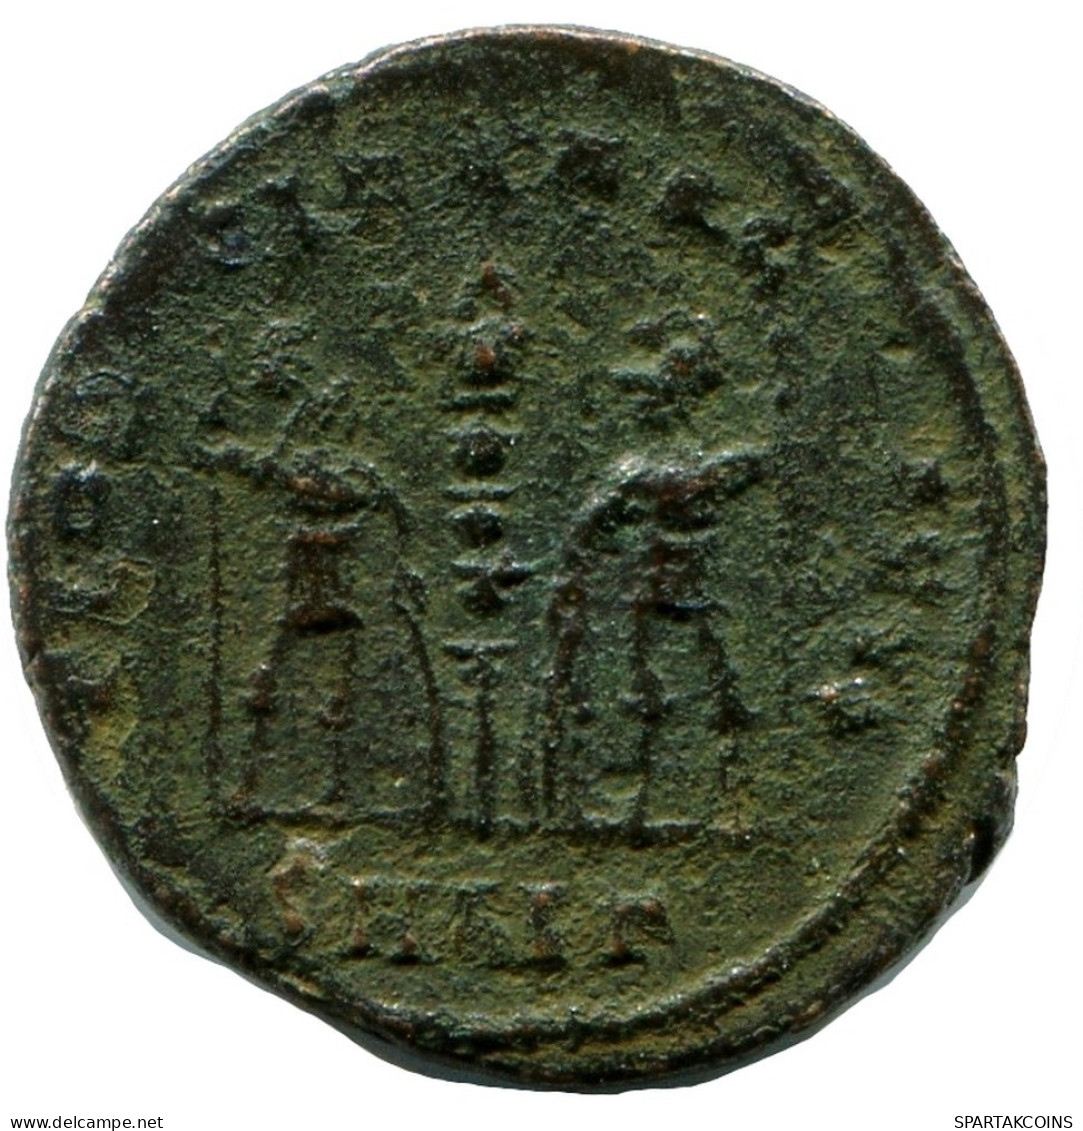 CONSTANS MINTED IN ALEKSANDRIA FROM THE ROYAL ONTARIO MUSEUM #ANC11363.14.U.A - The Christian Empire (307 AD To 363 AD)